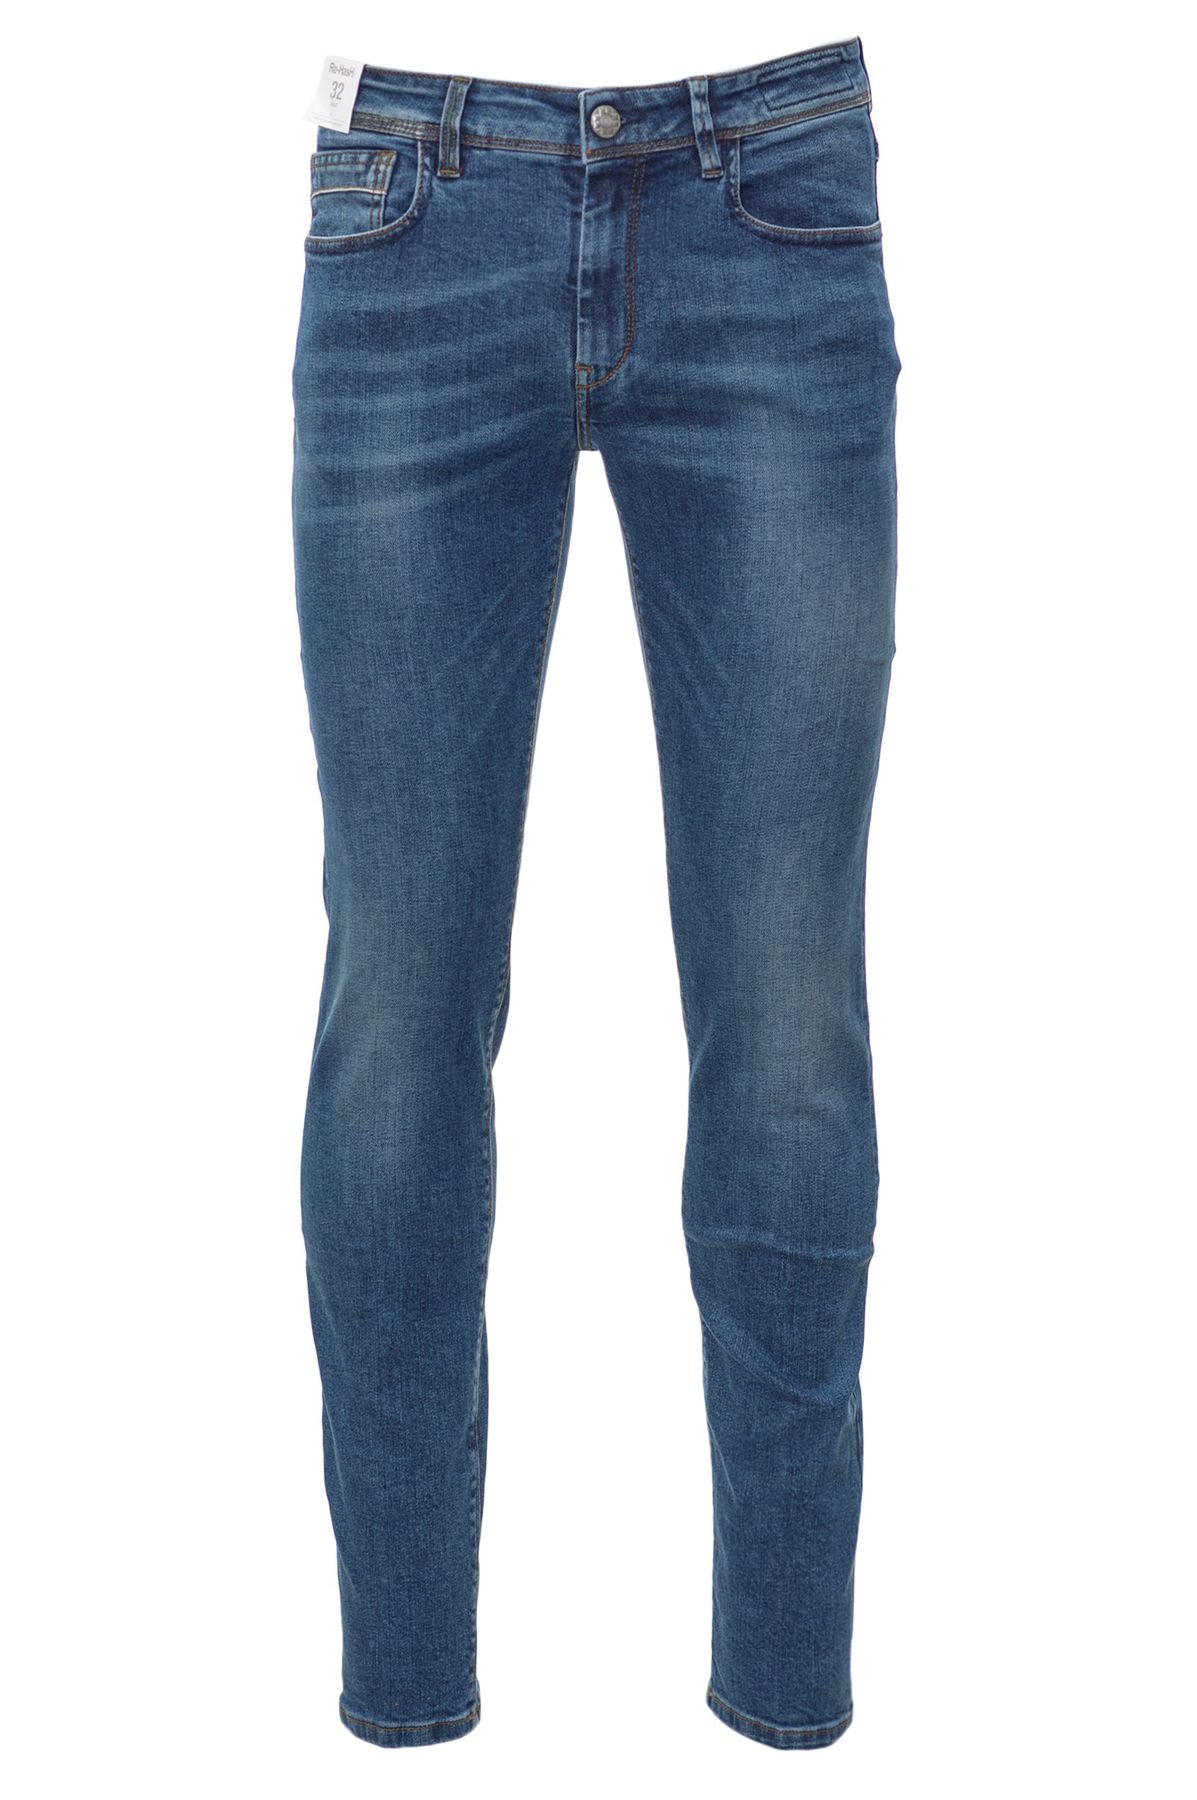 Re-HasH Jeans Spring/Summer Cotton